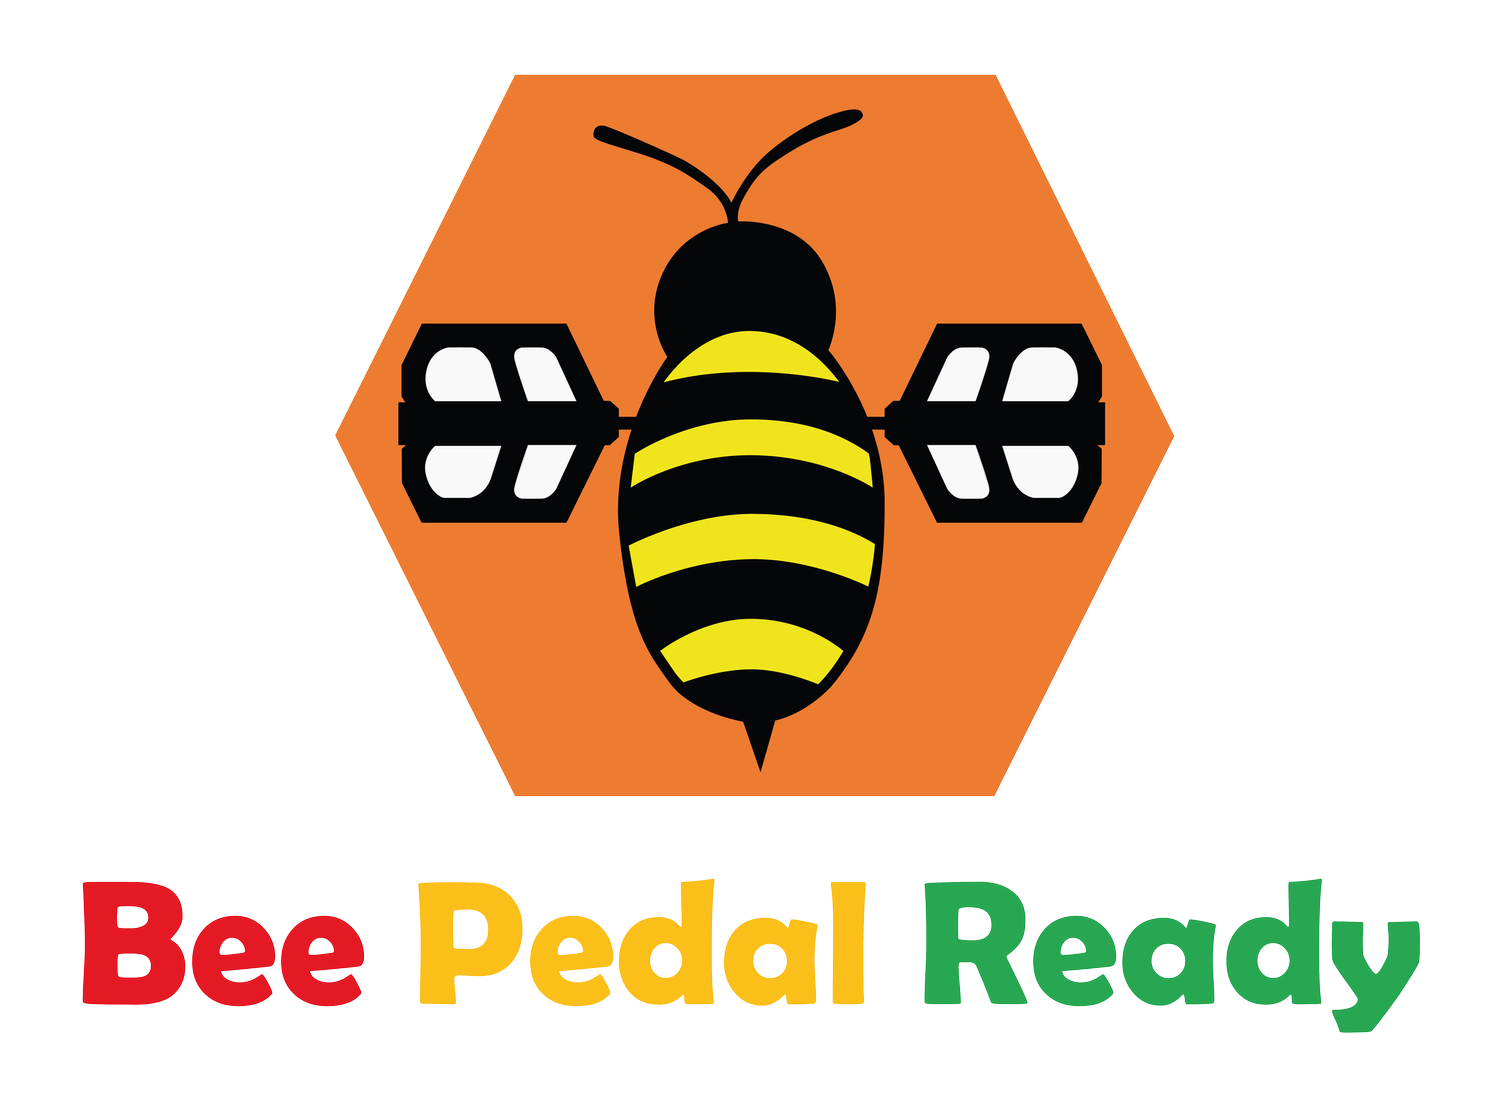 Bee Pedal Ready